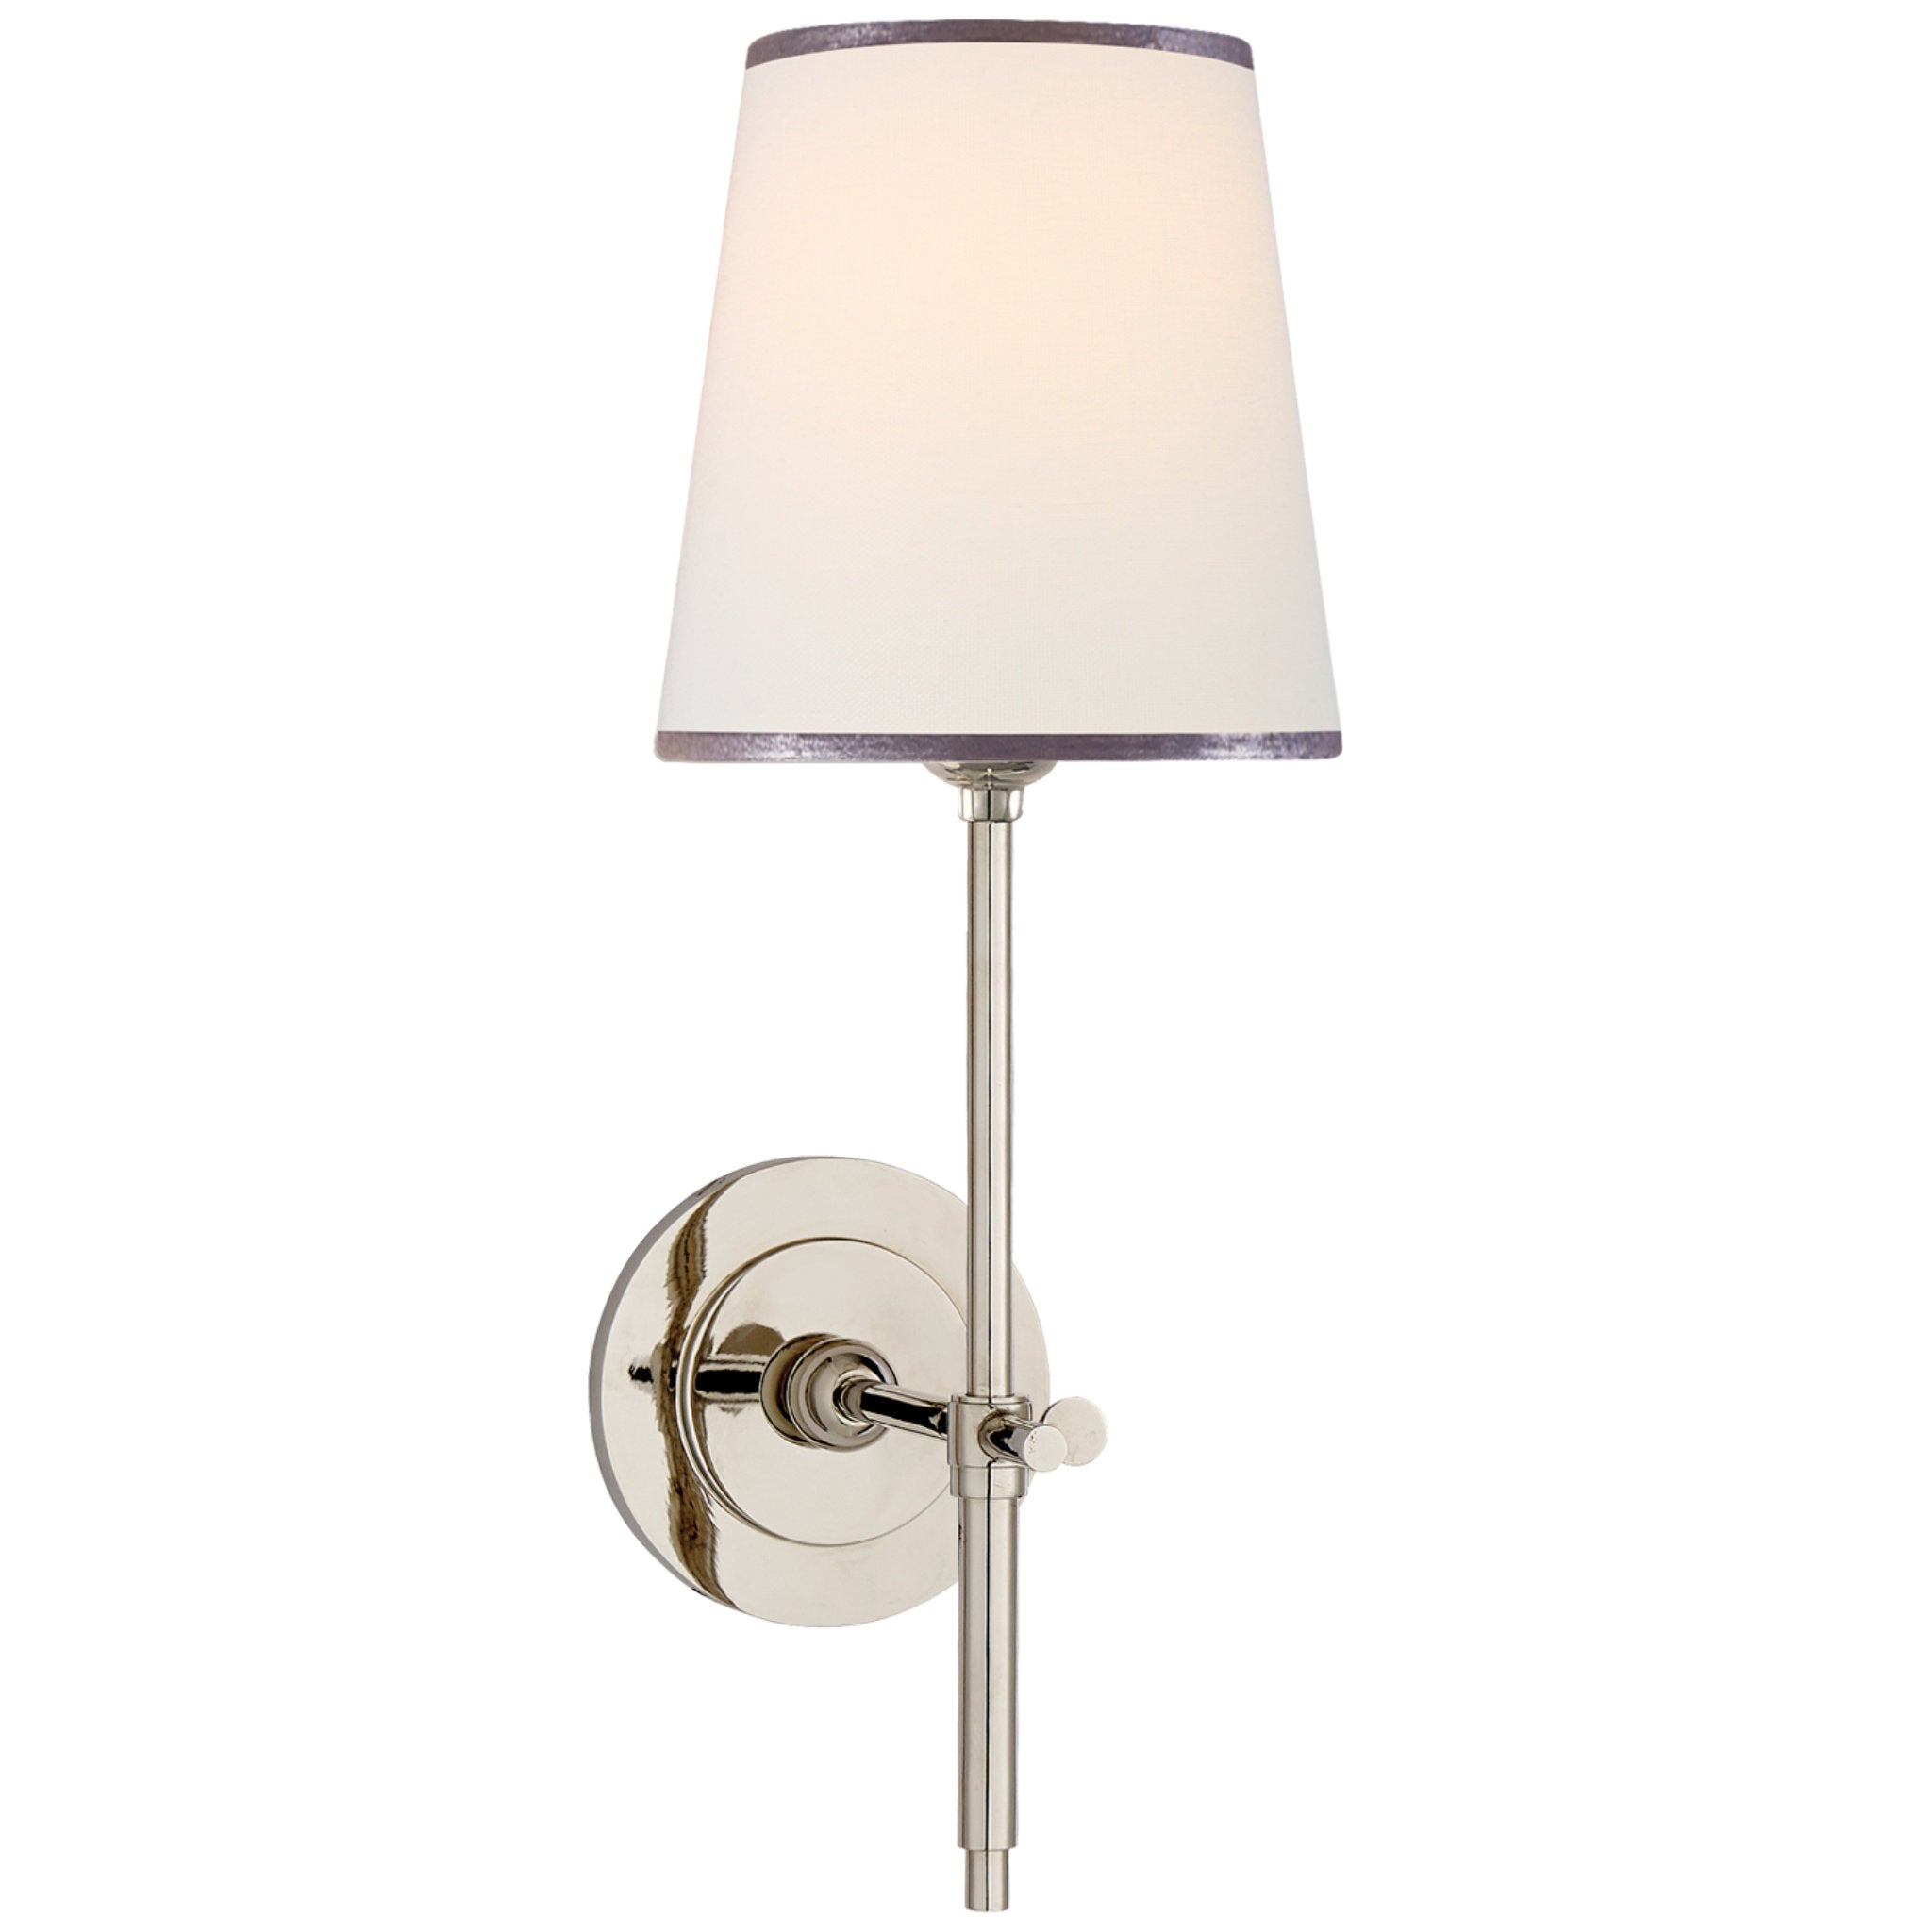 Thomas O'Brien Bryant Sconce in Polished Nickel with Linen Shade with Silver Tape